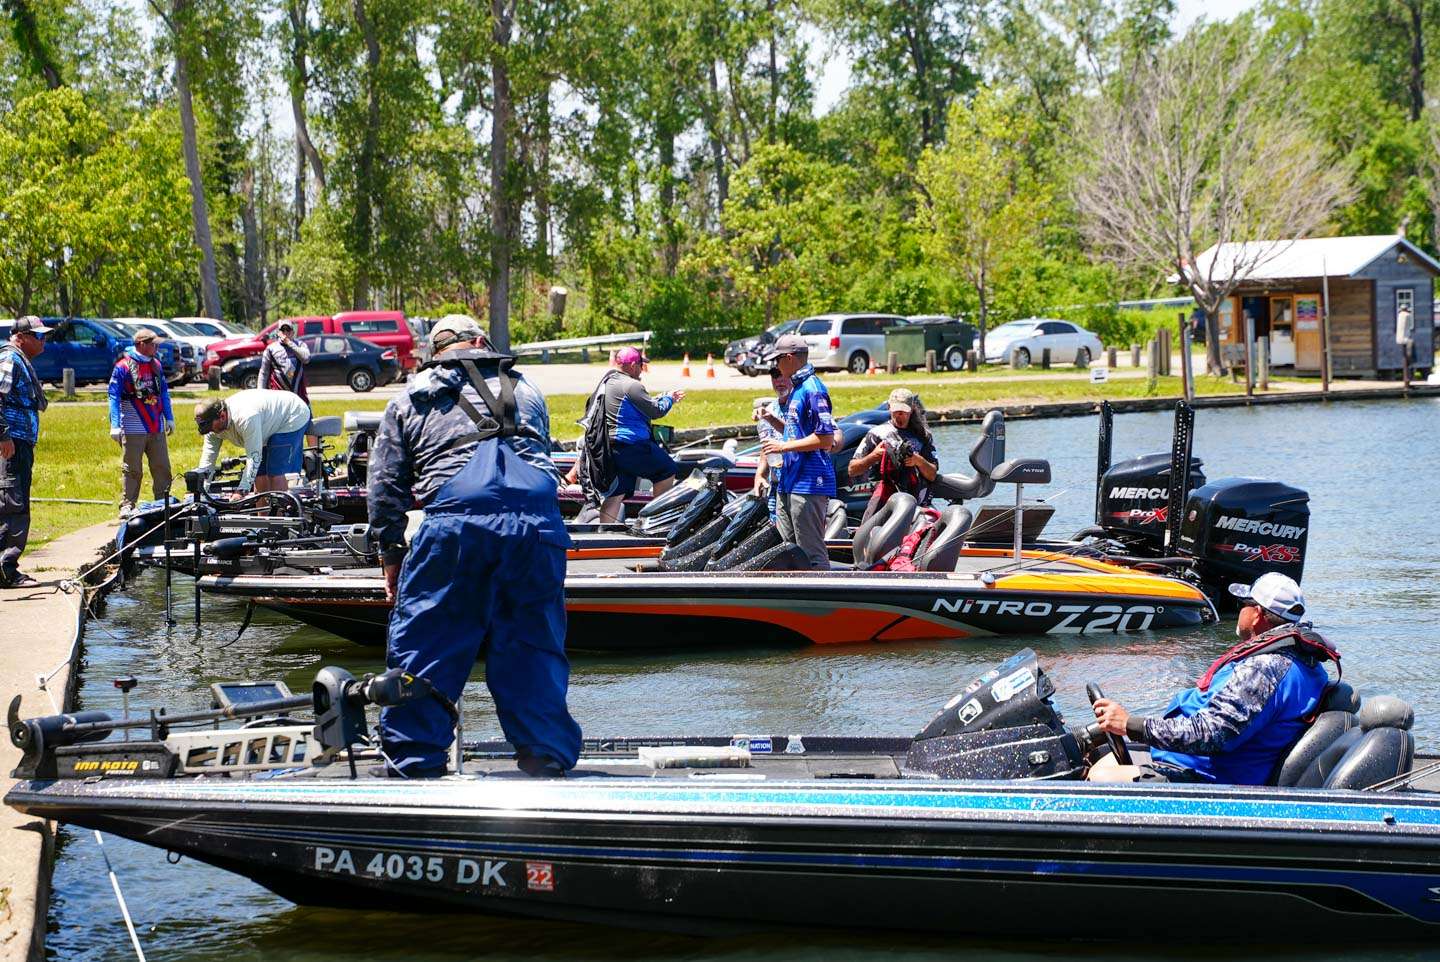 See how the Nation anglers fared on Day 2 of the 2021 TNT Fireworks B.A.S.S. Nation Northeast Regional!